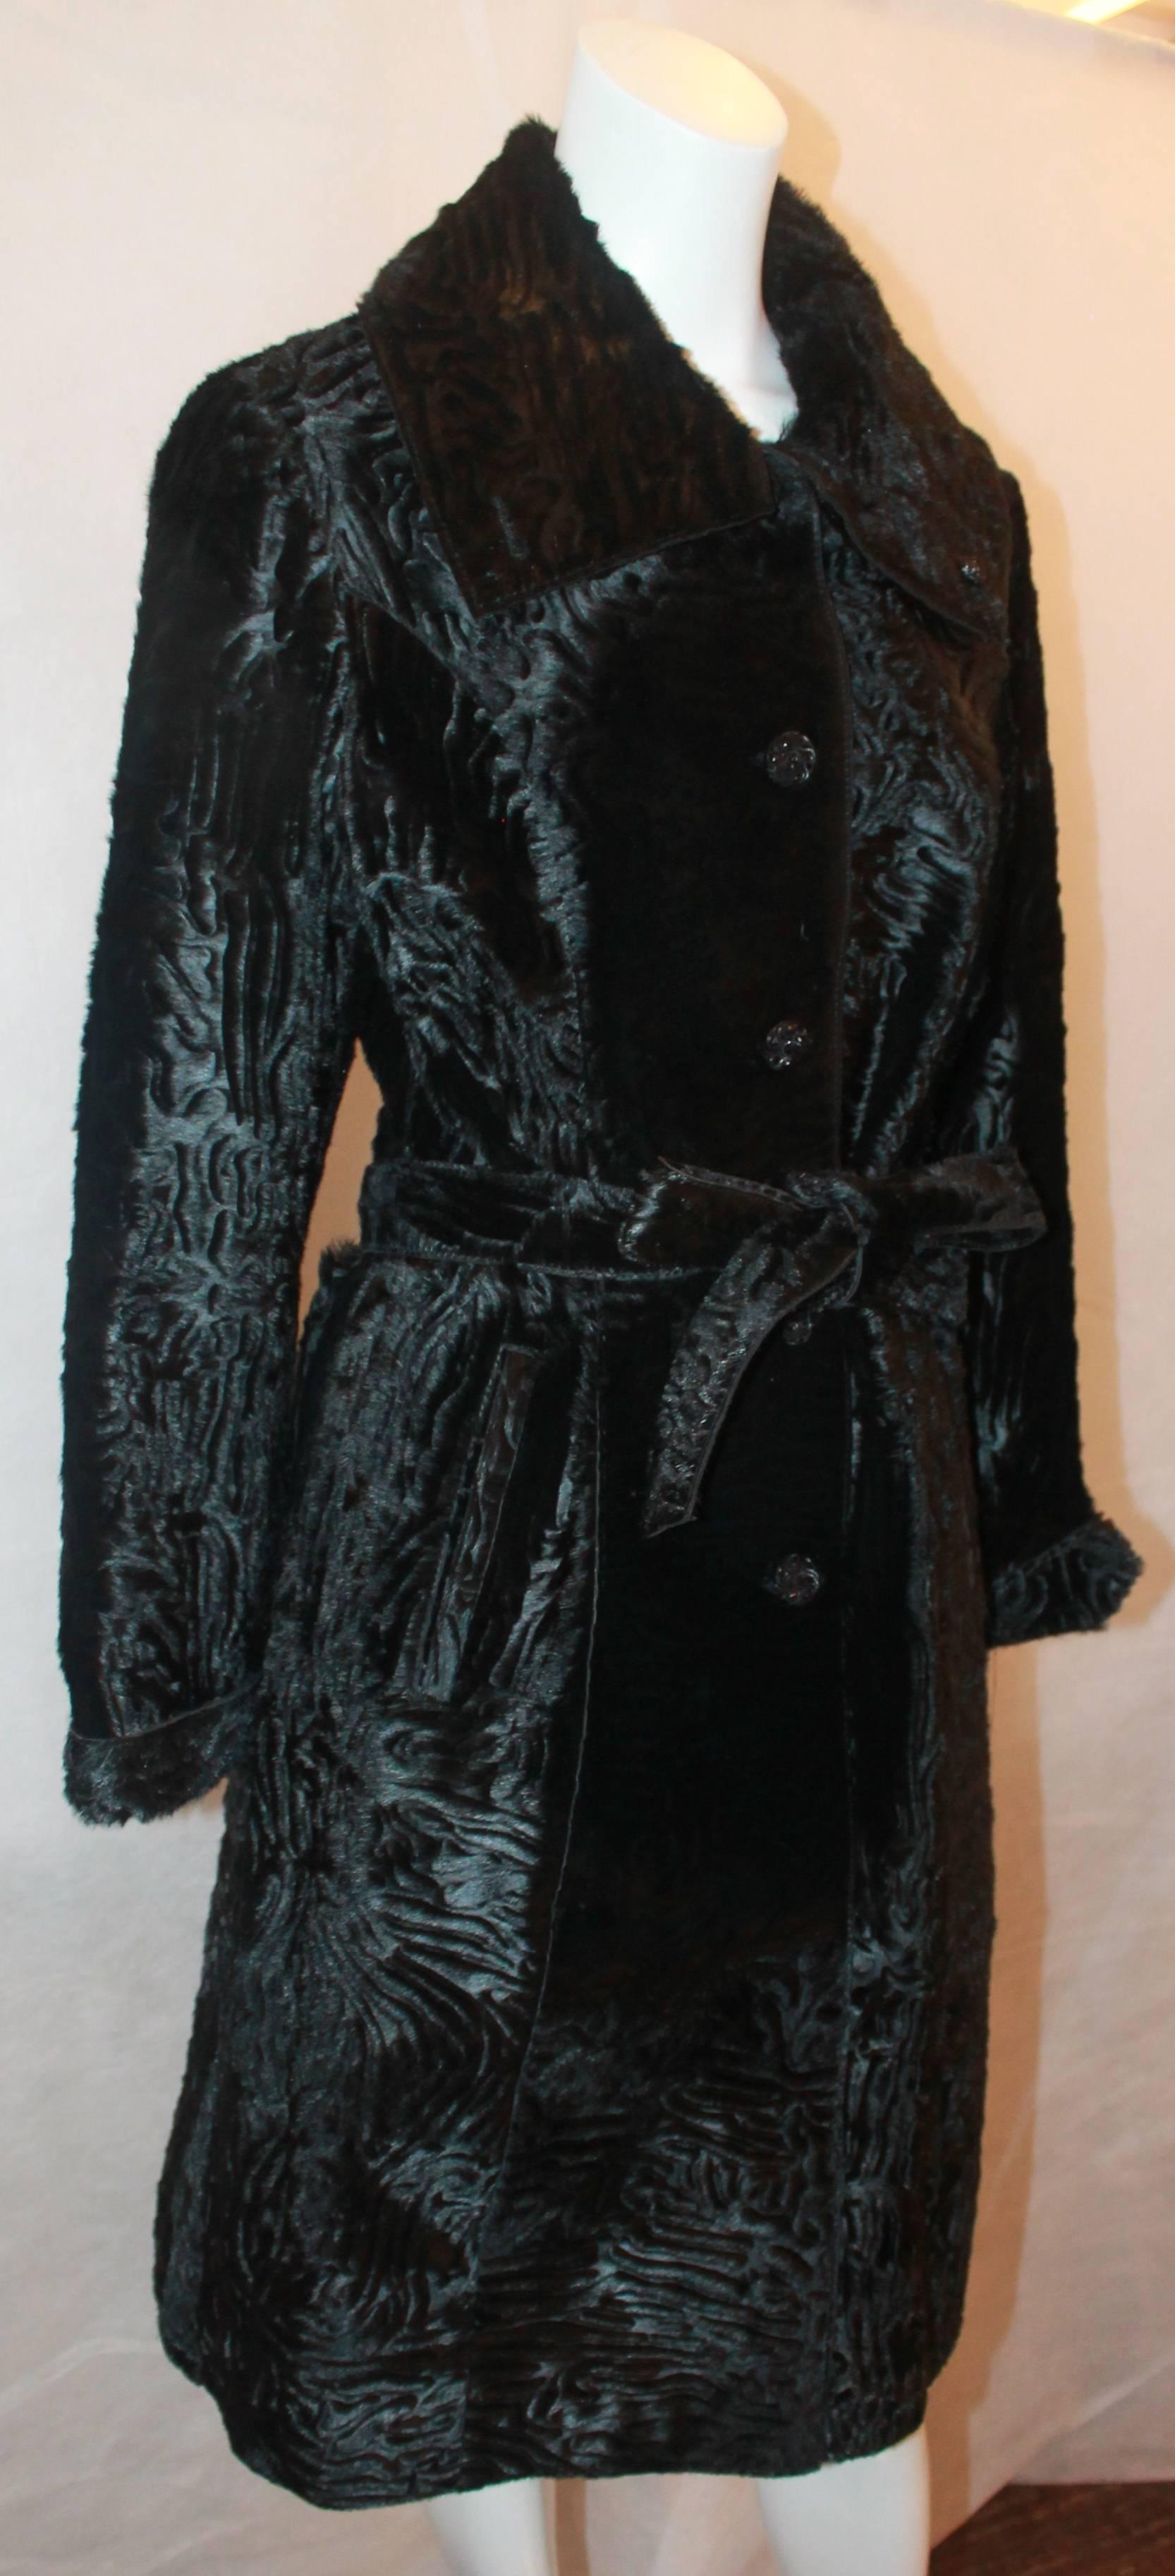 Marengo Black Broadtail Collared Full Coat with Belt - L. This coat has 2 front pockets and black rhinestone buttons. It is in excellent condition. 

Measurements:
Bust- 38